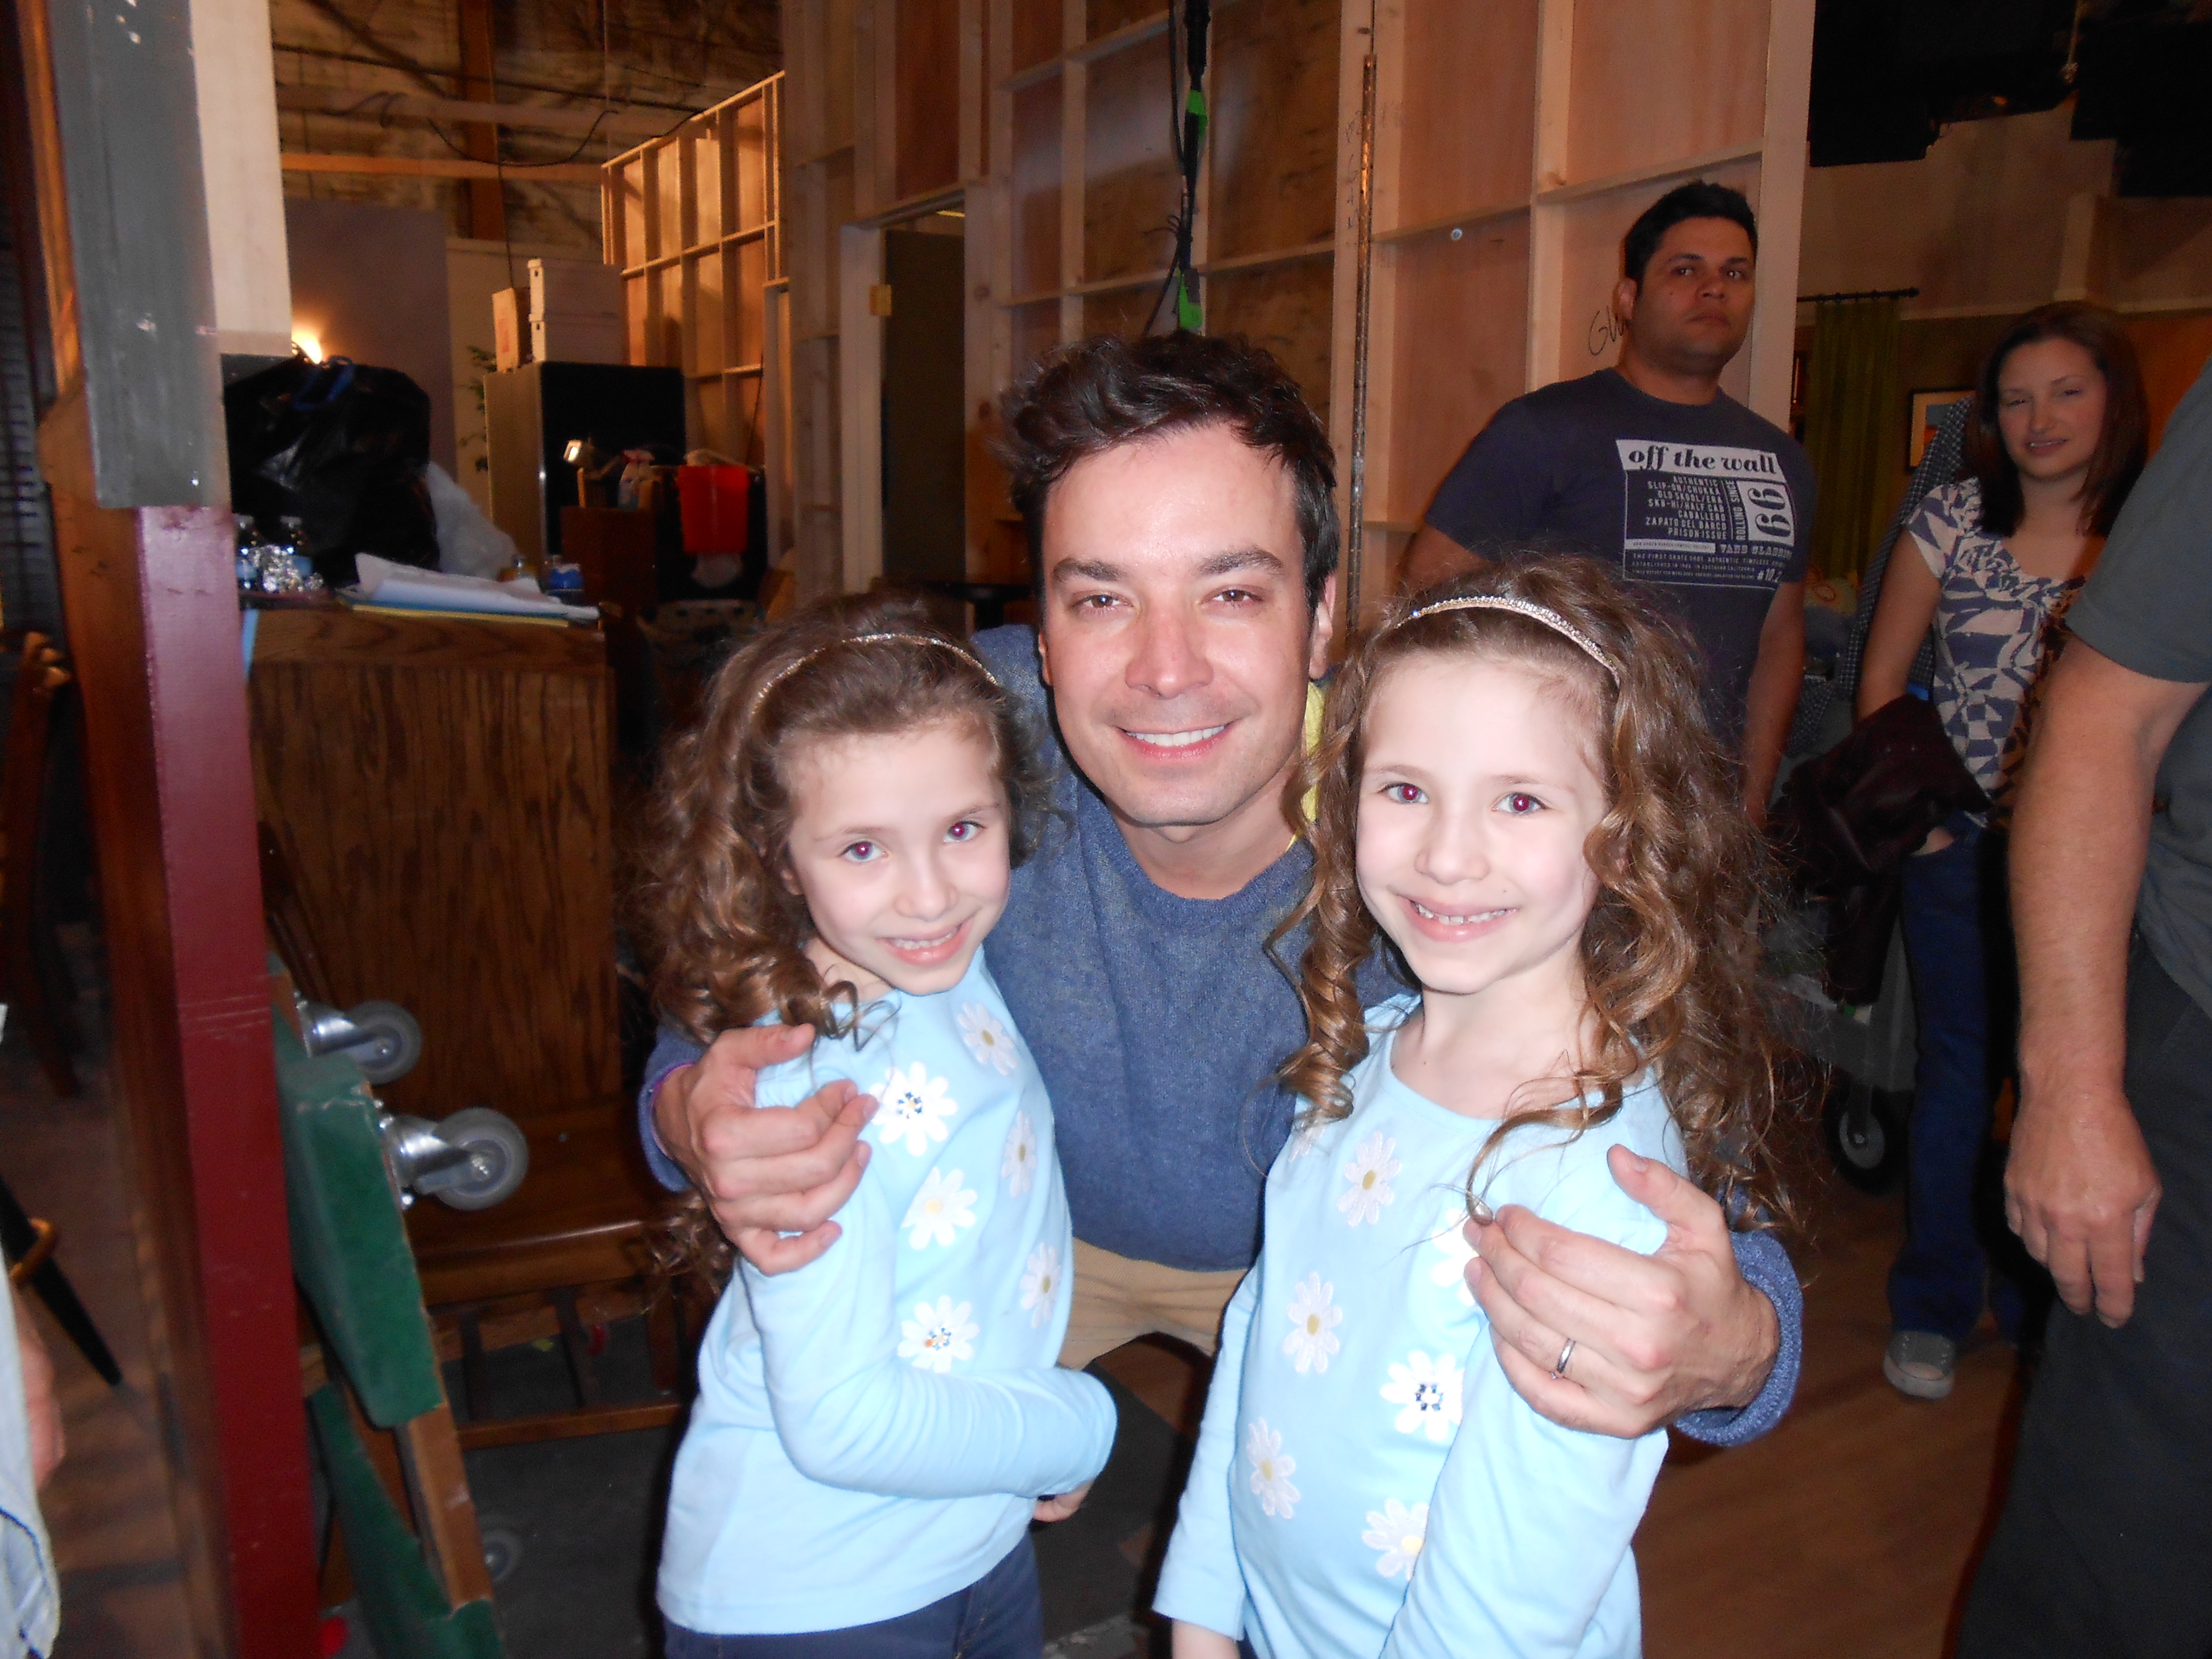 Bianca and Chiara Dambrosio with Jimmy Fallon on set of ( DILFs) Guys with kids. April 2012